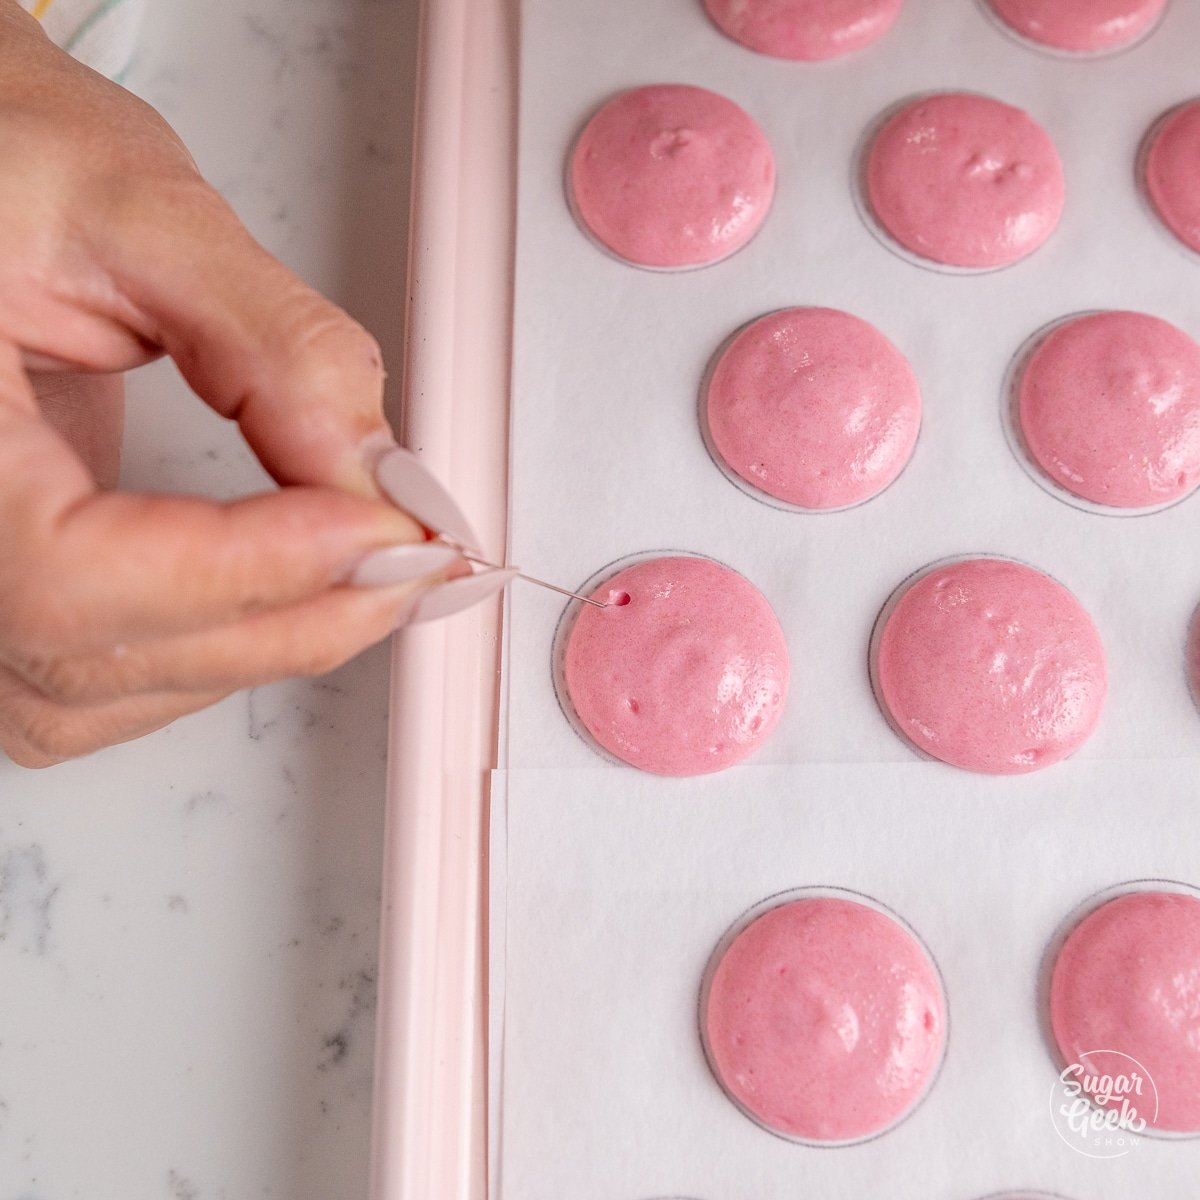 hand holding a needle above unbaked macarons